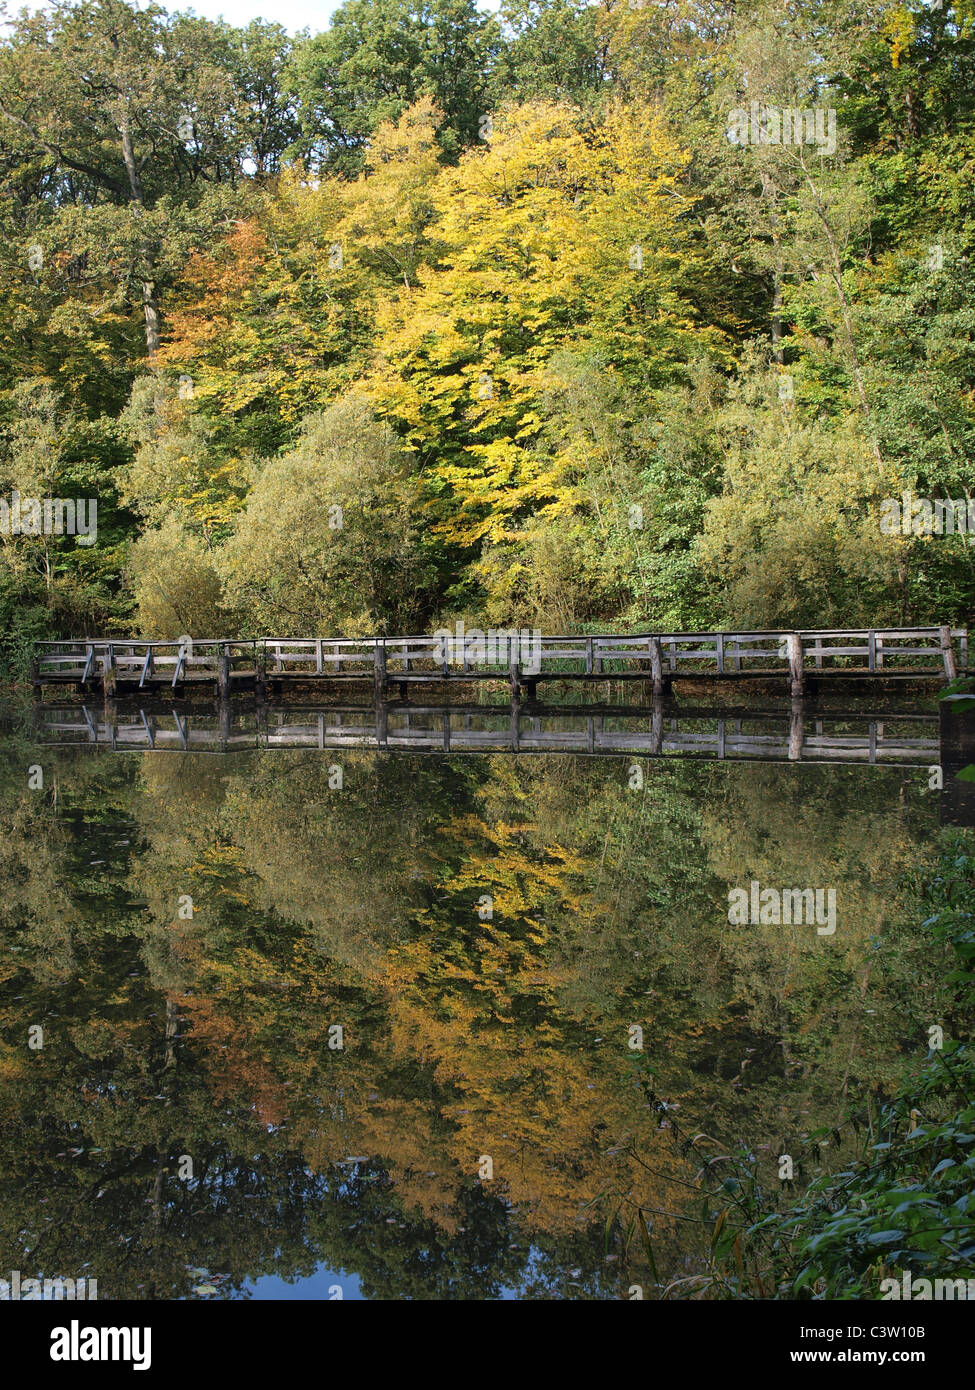 A reflection of trees and a walkway in a pond Stock Photo